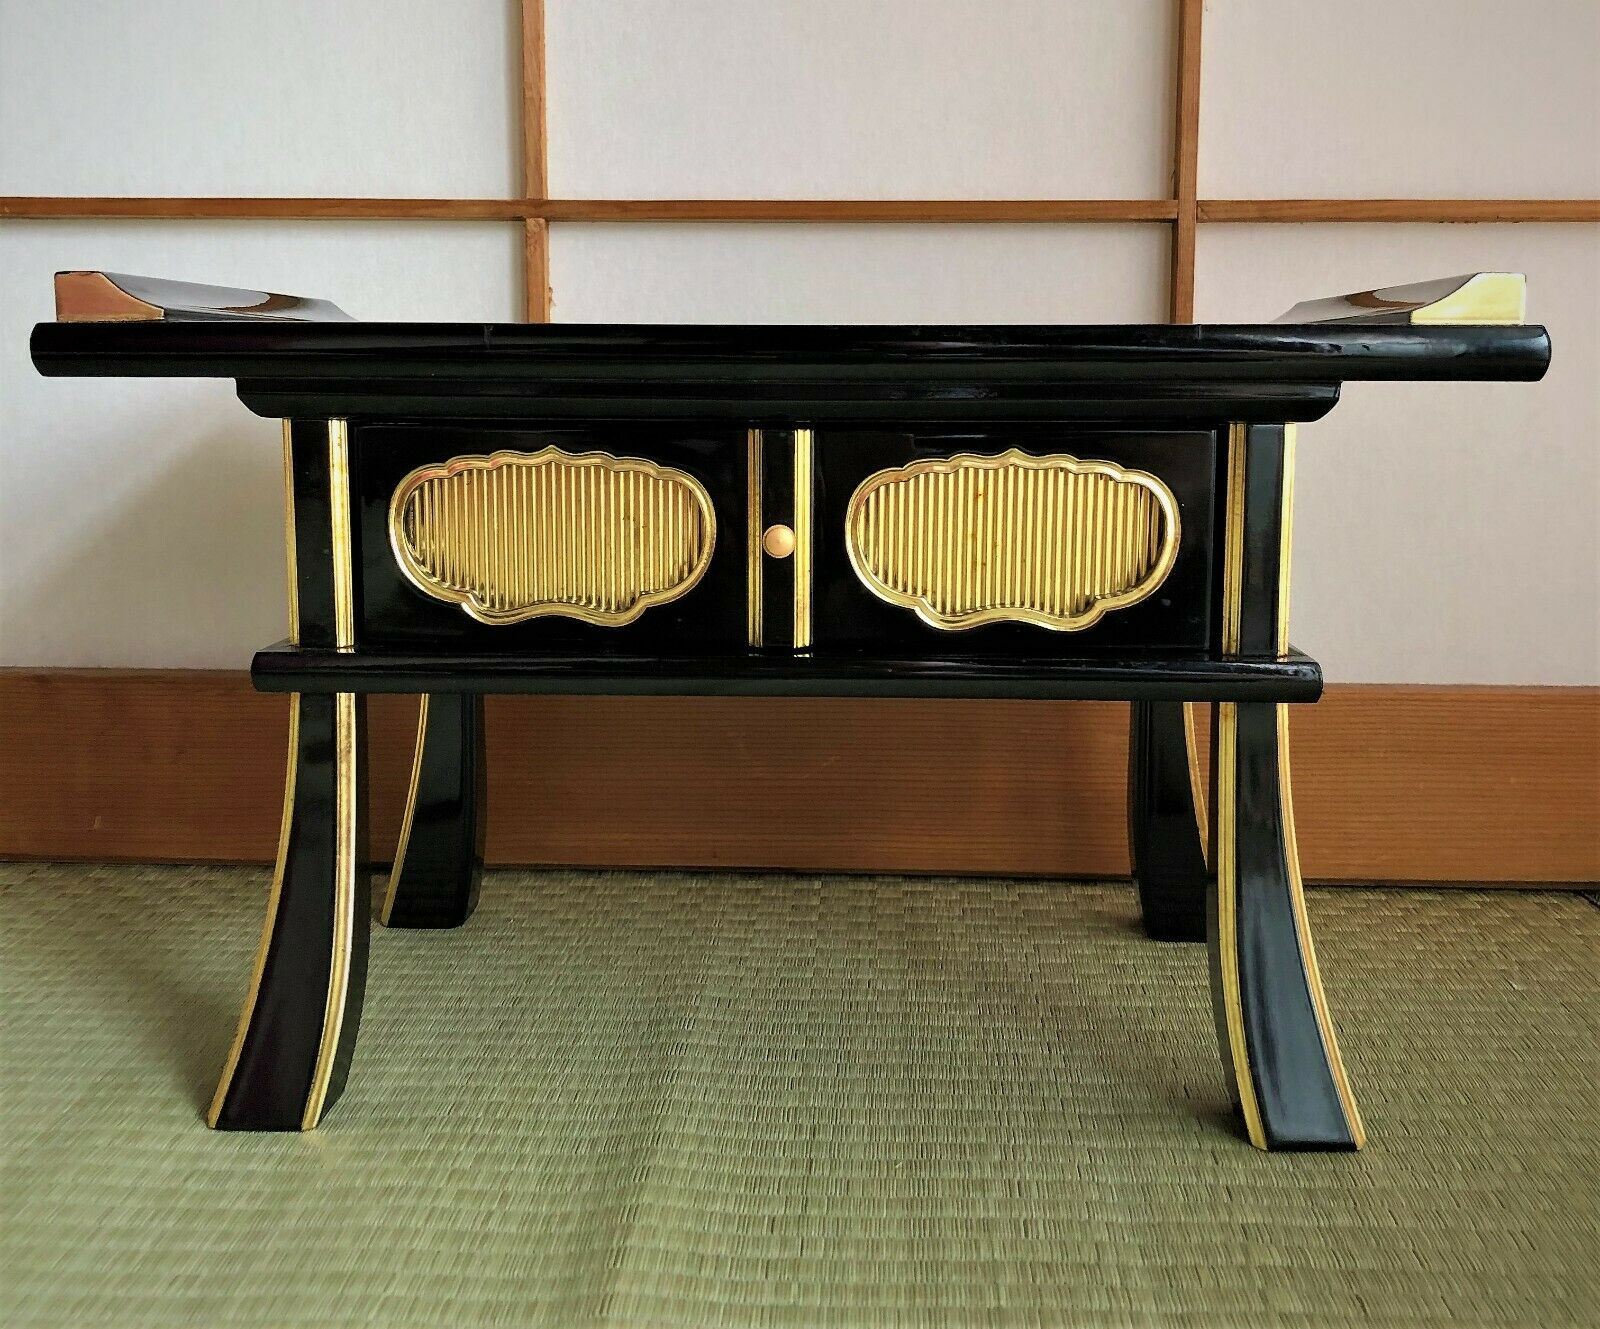 Japanese Small Wood Table Kyozukue Altar Buddhist Temple Black & Gold L.16.5inch